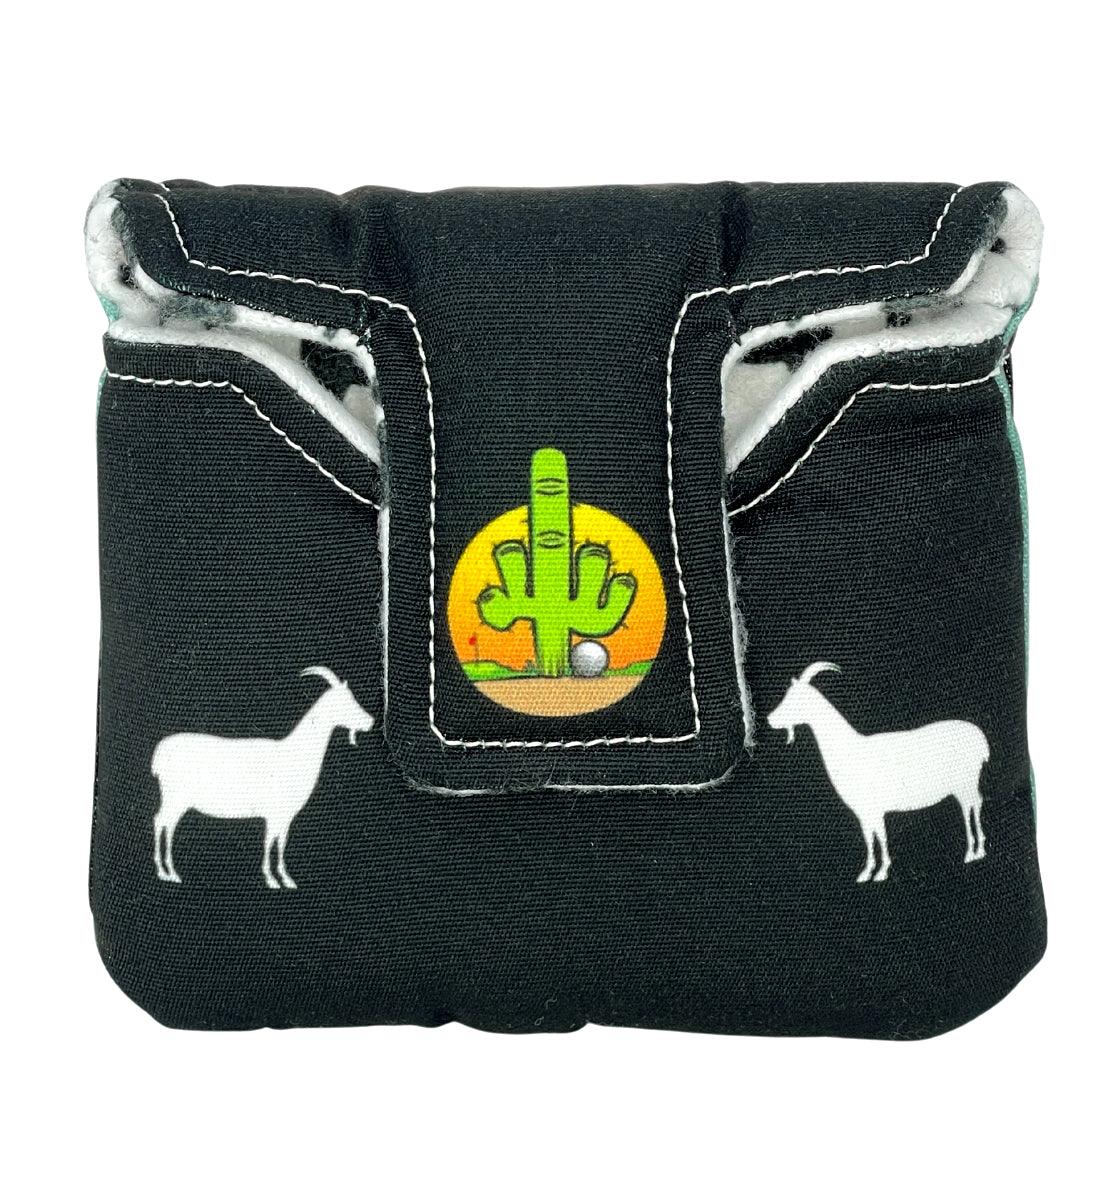 G.O.A.T. Mallet Putter Cover – Greyson Clothiers